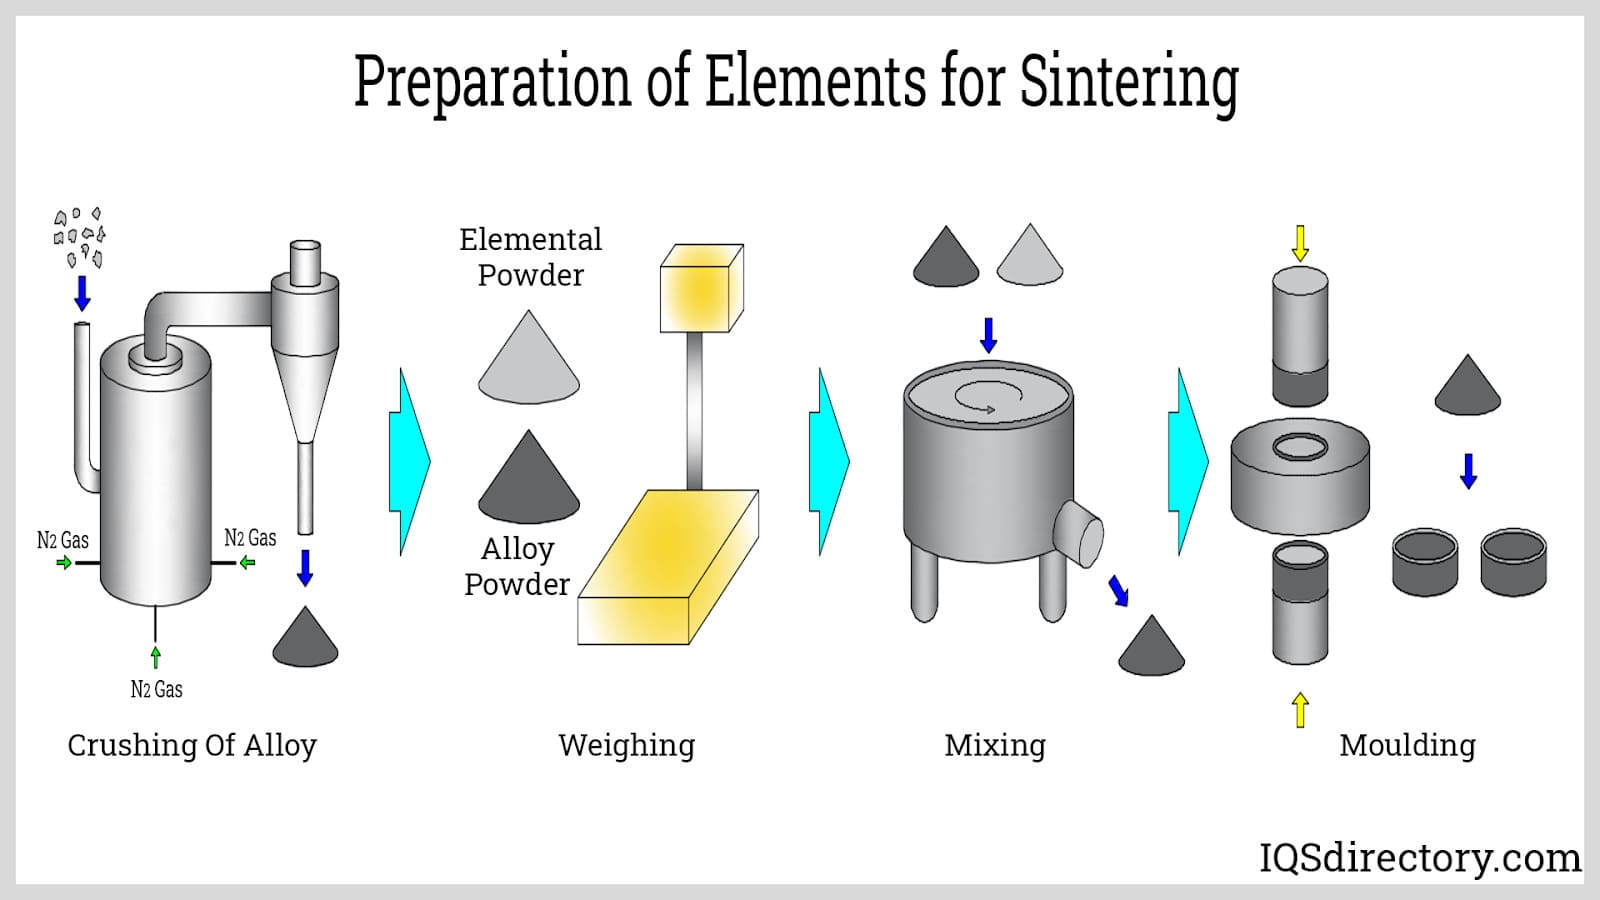 Preparation of Elements for Sintering